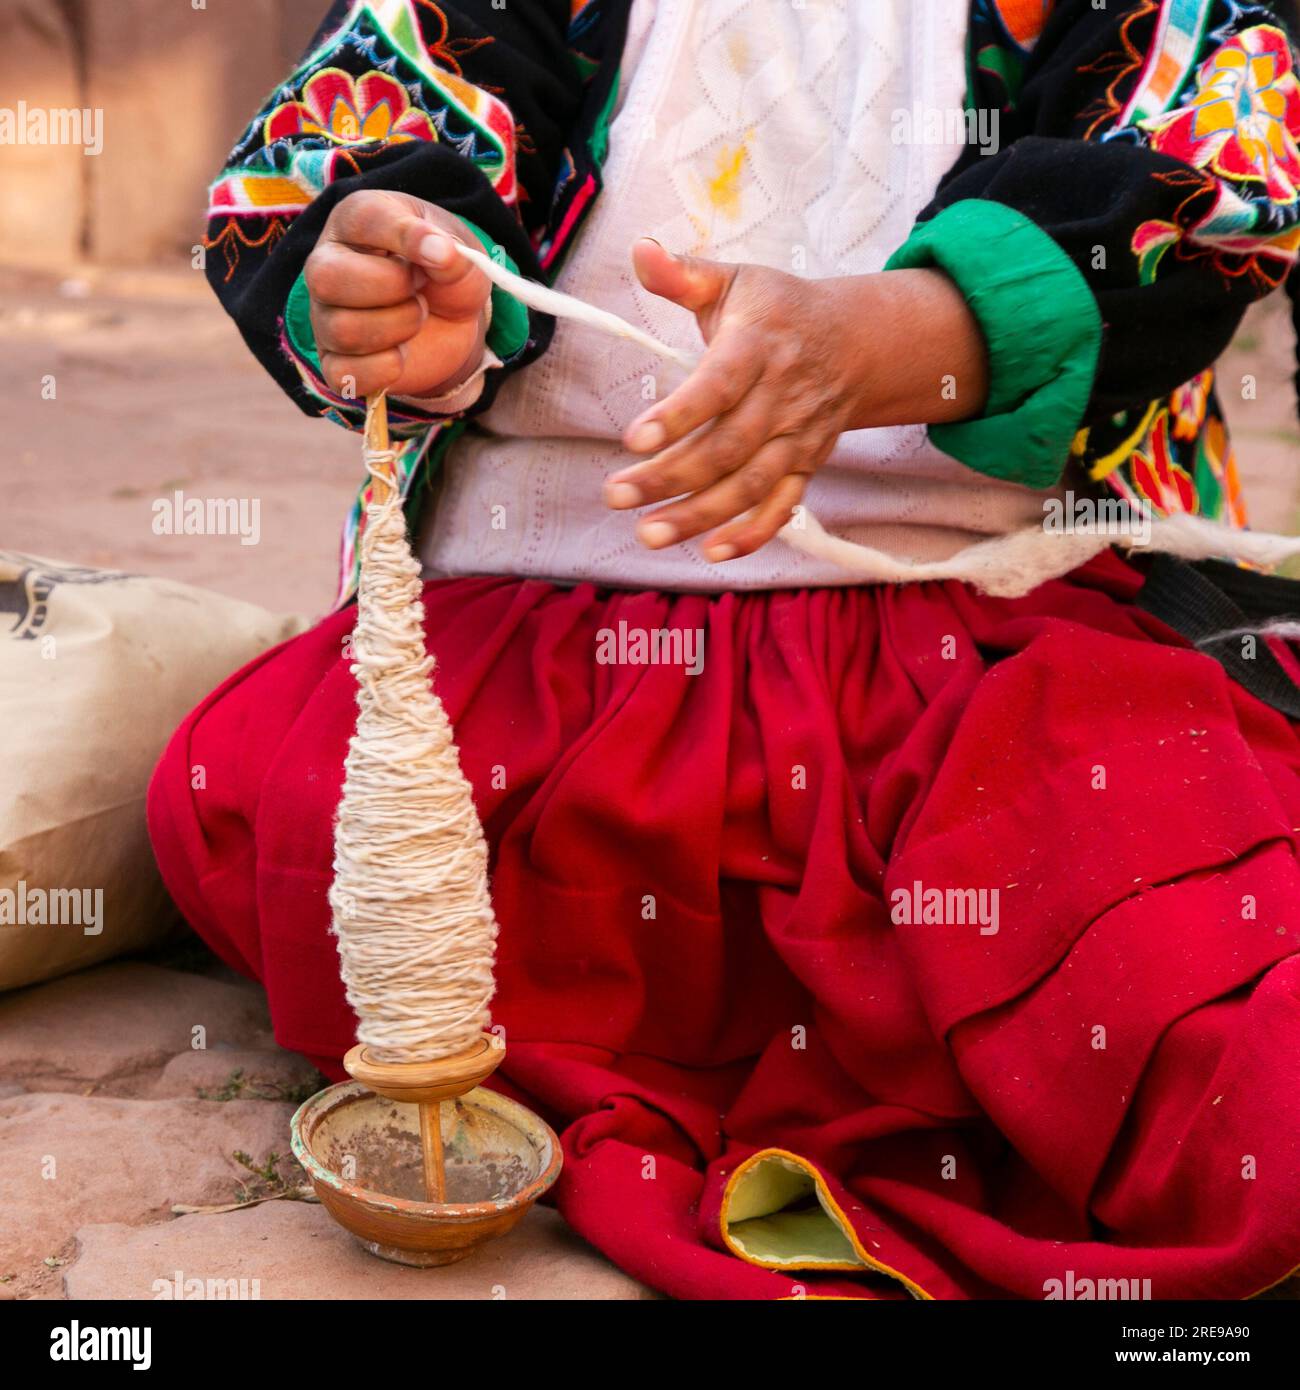 Material for the production of textile crafts in an indigenous community in Peru. Stock Photo